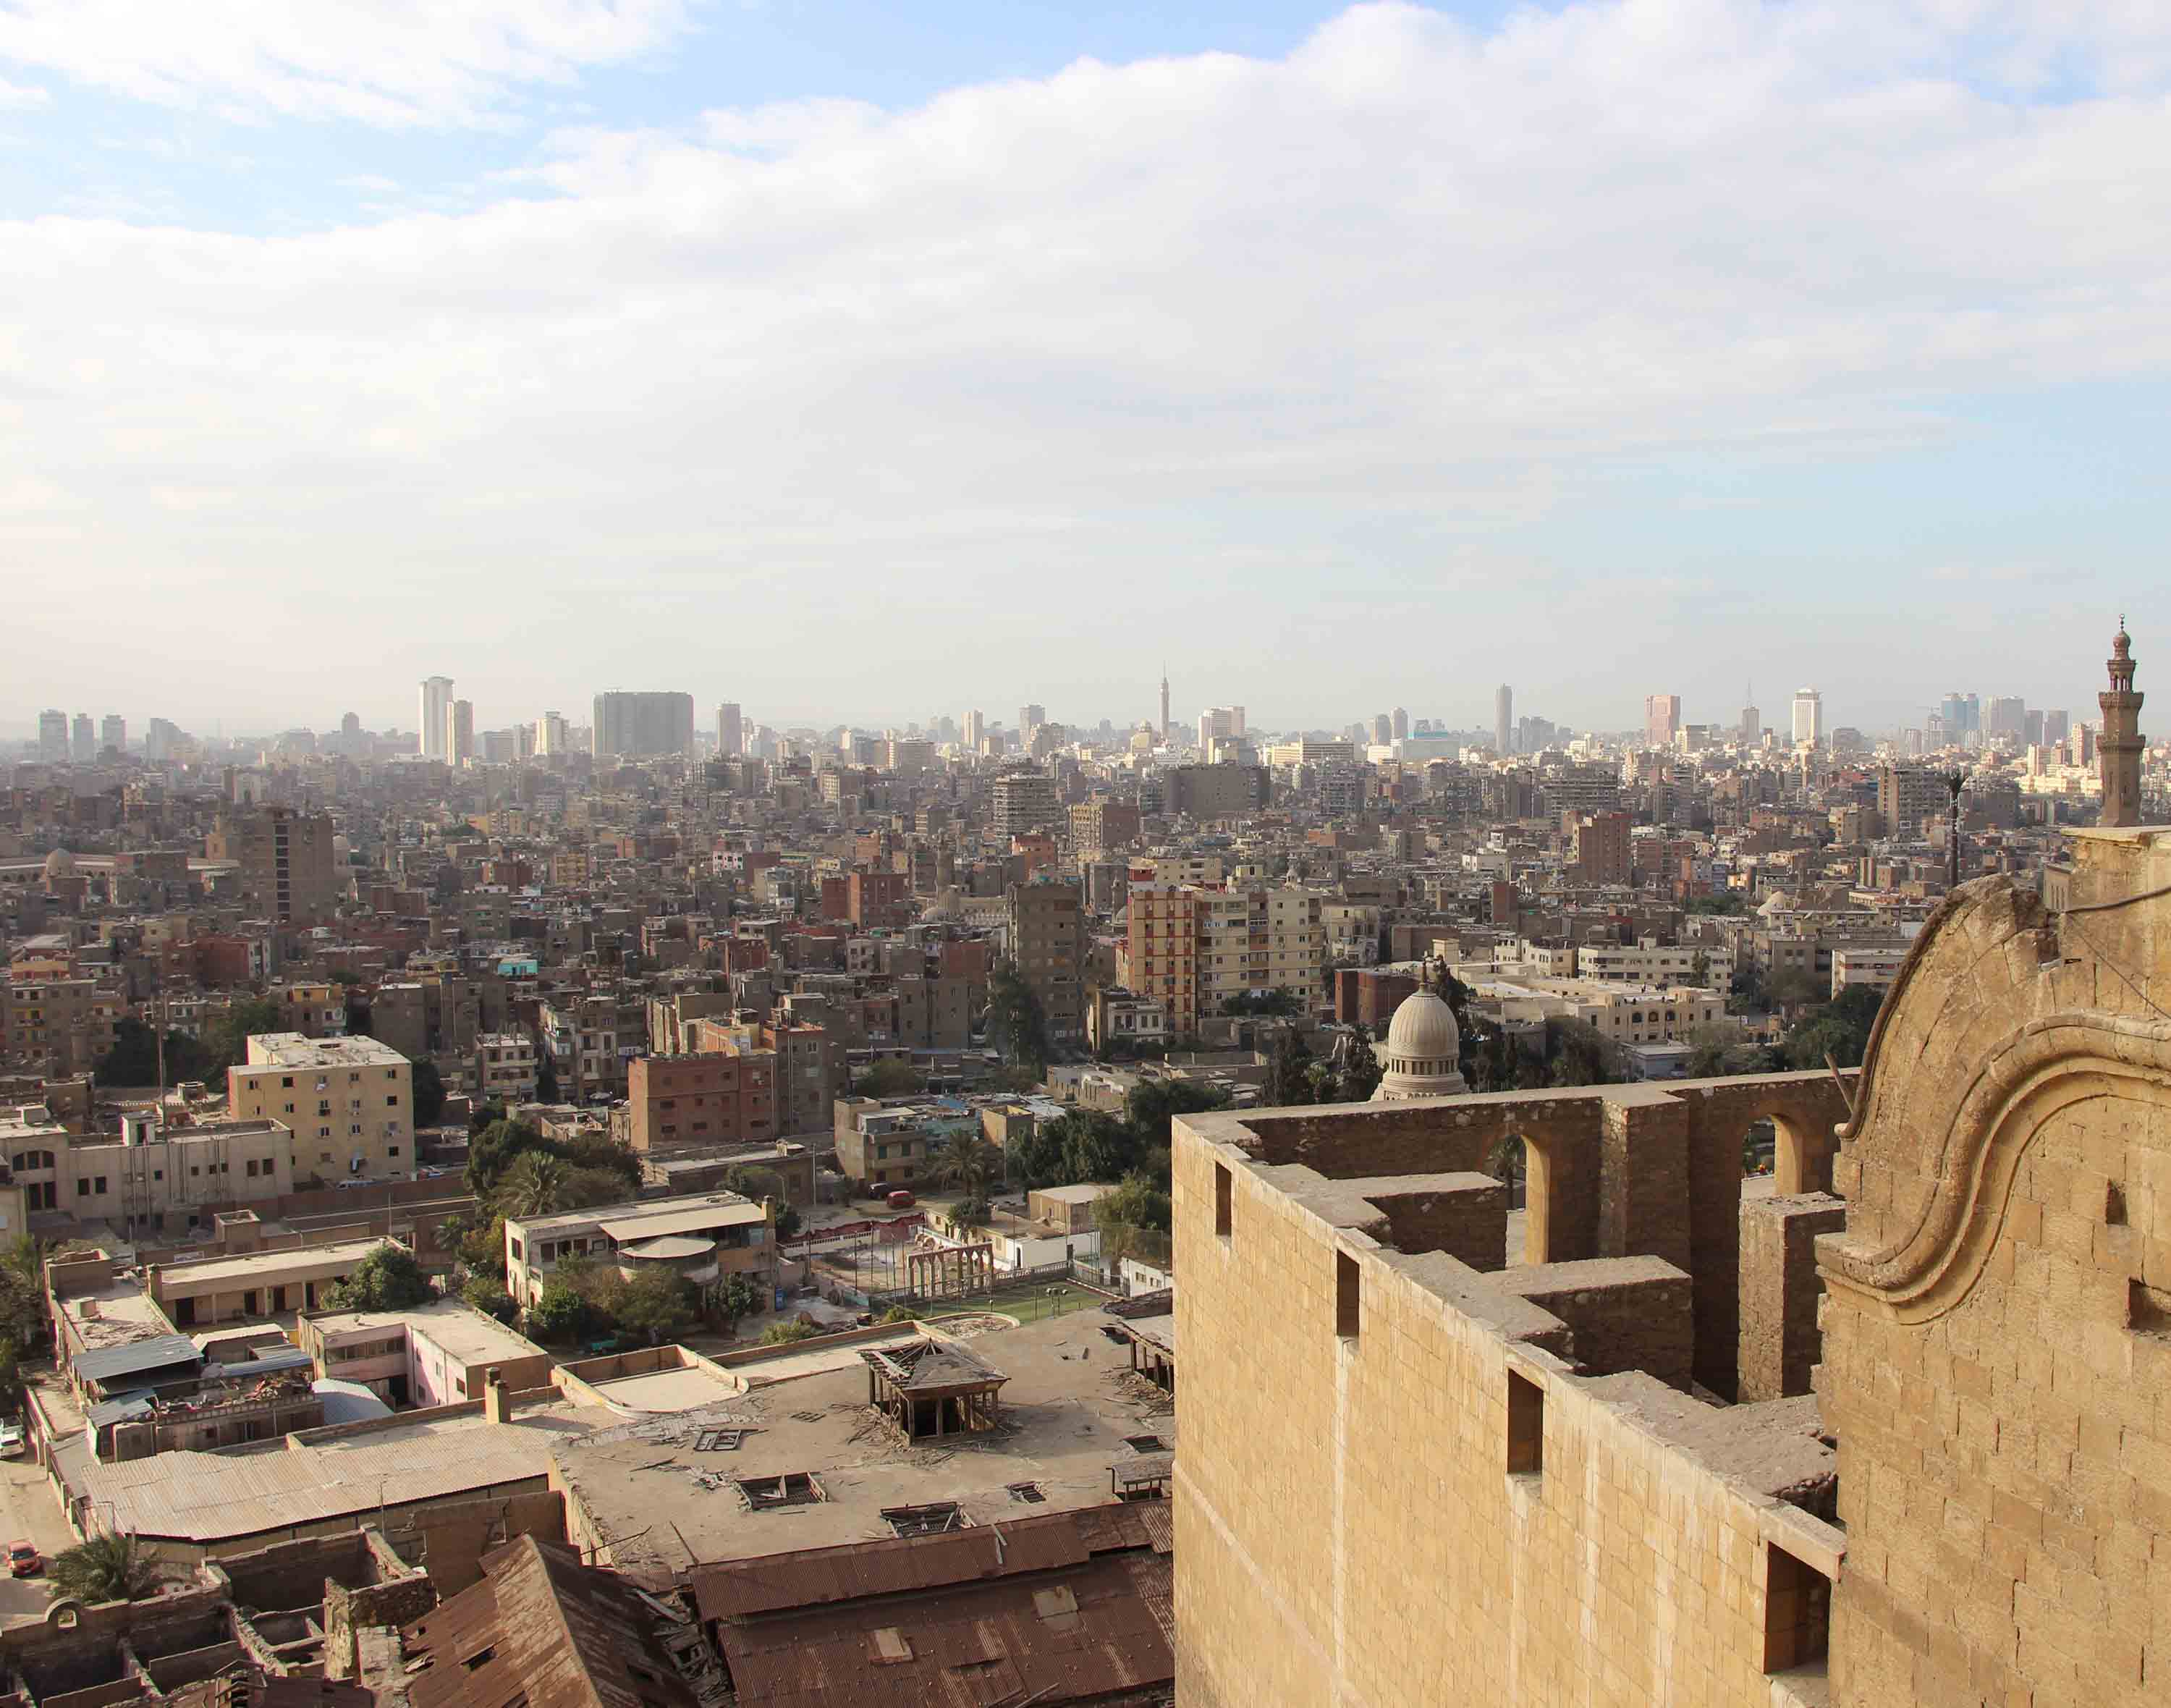 Looking out on the city of Cairo, Egypt, from the Citadel of Saladin